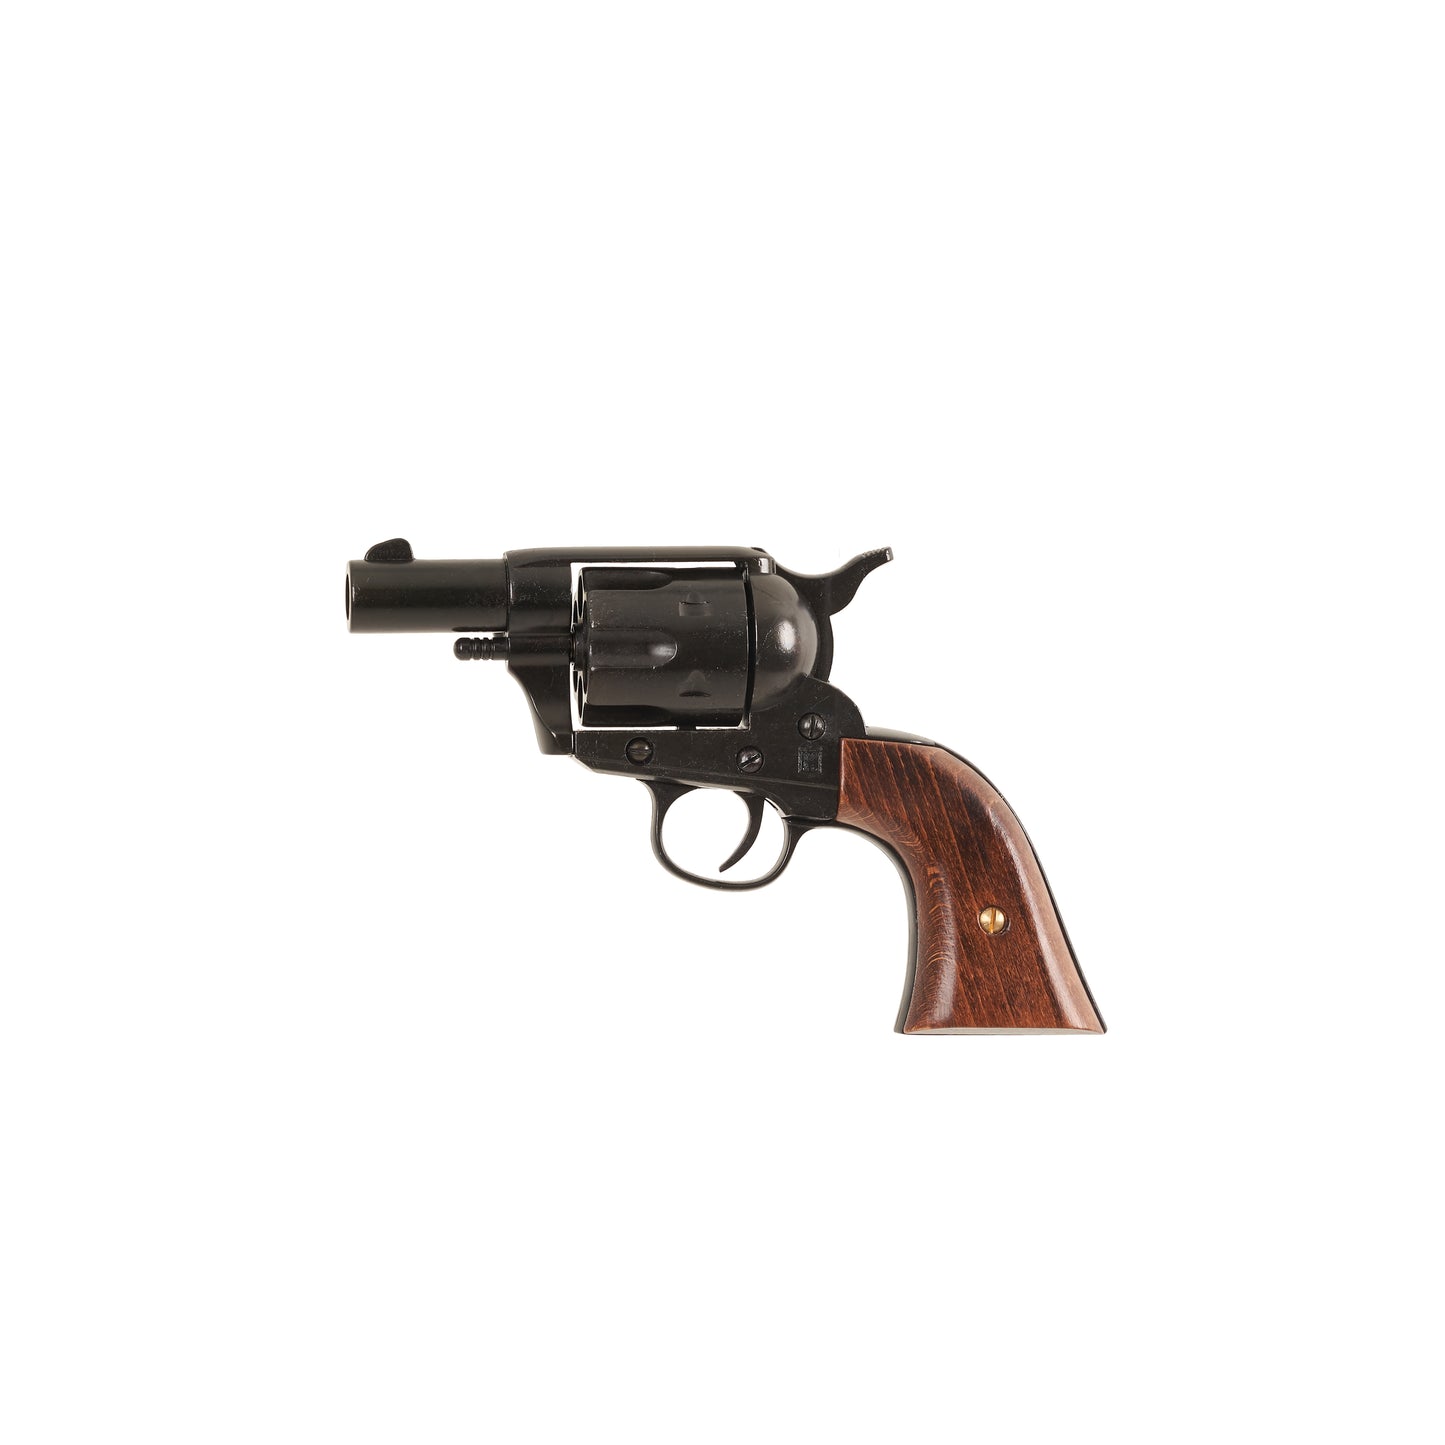 Left side view of Black Non-Firing 1873 .45 Caliber Short Revolver with wood grip.